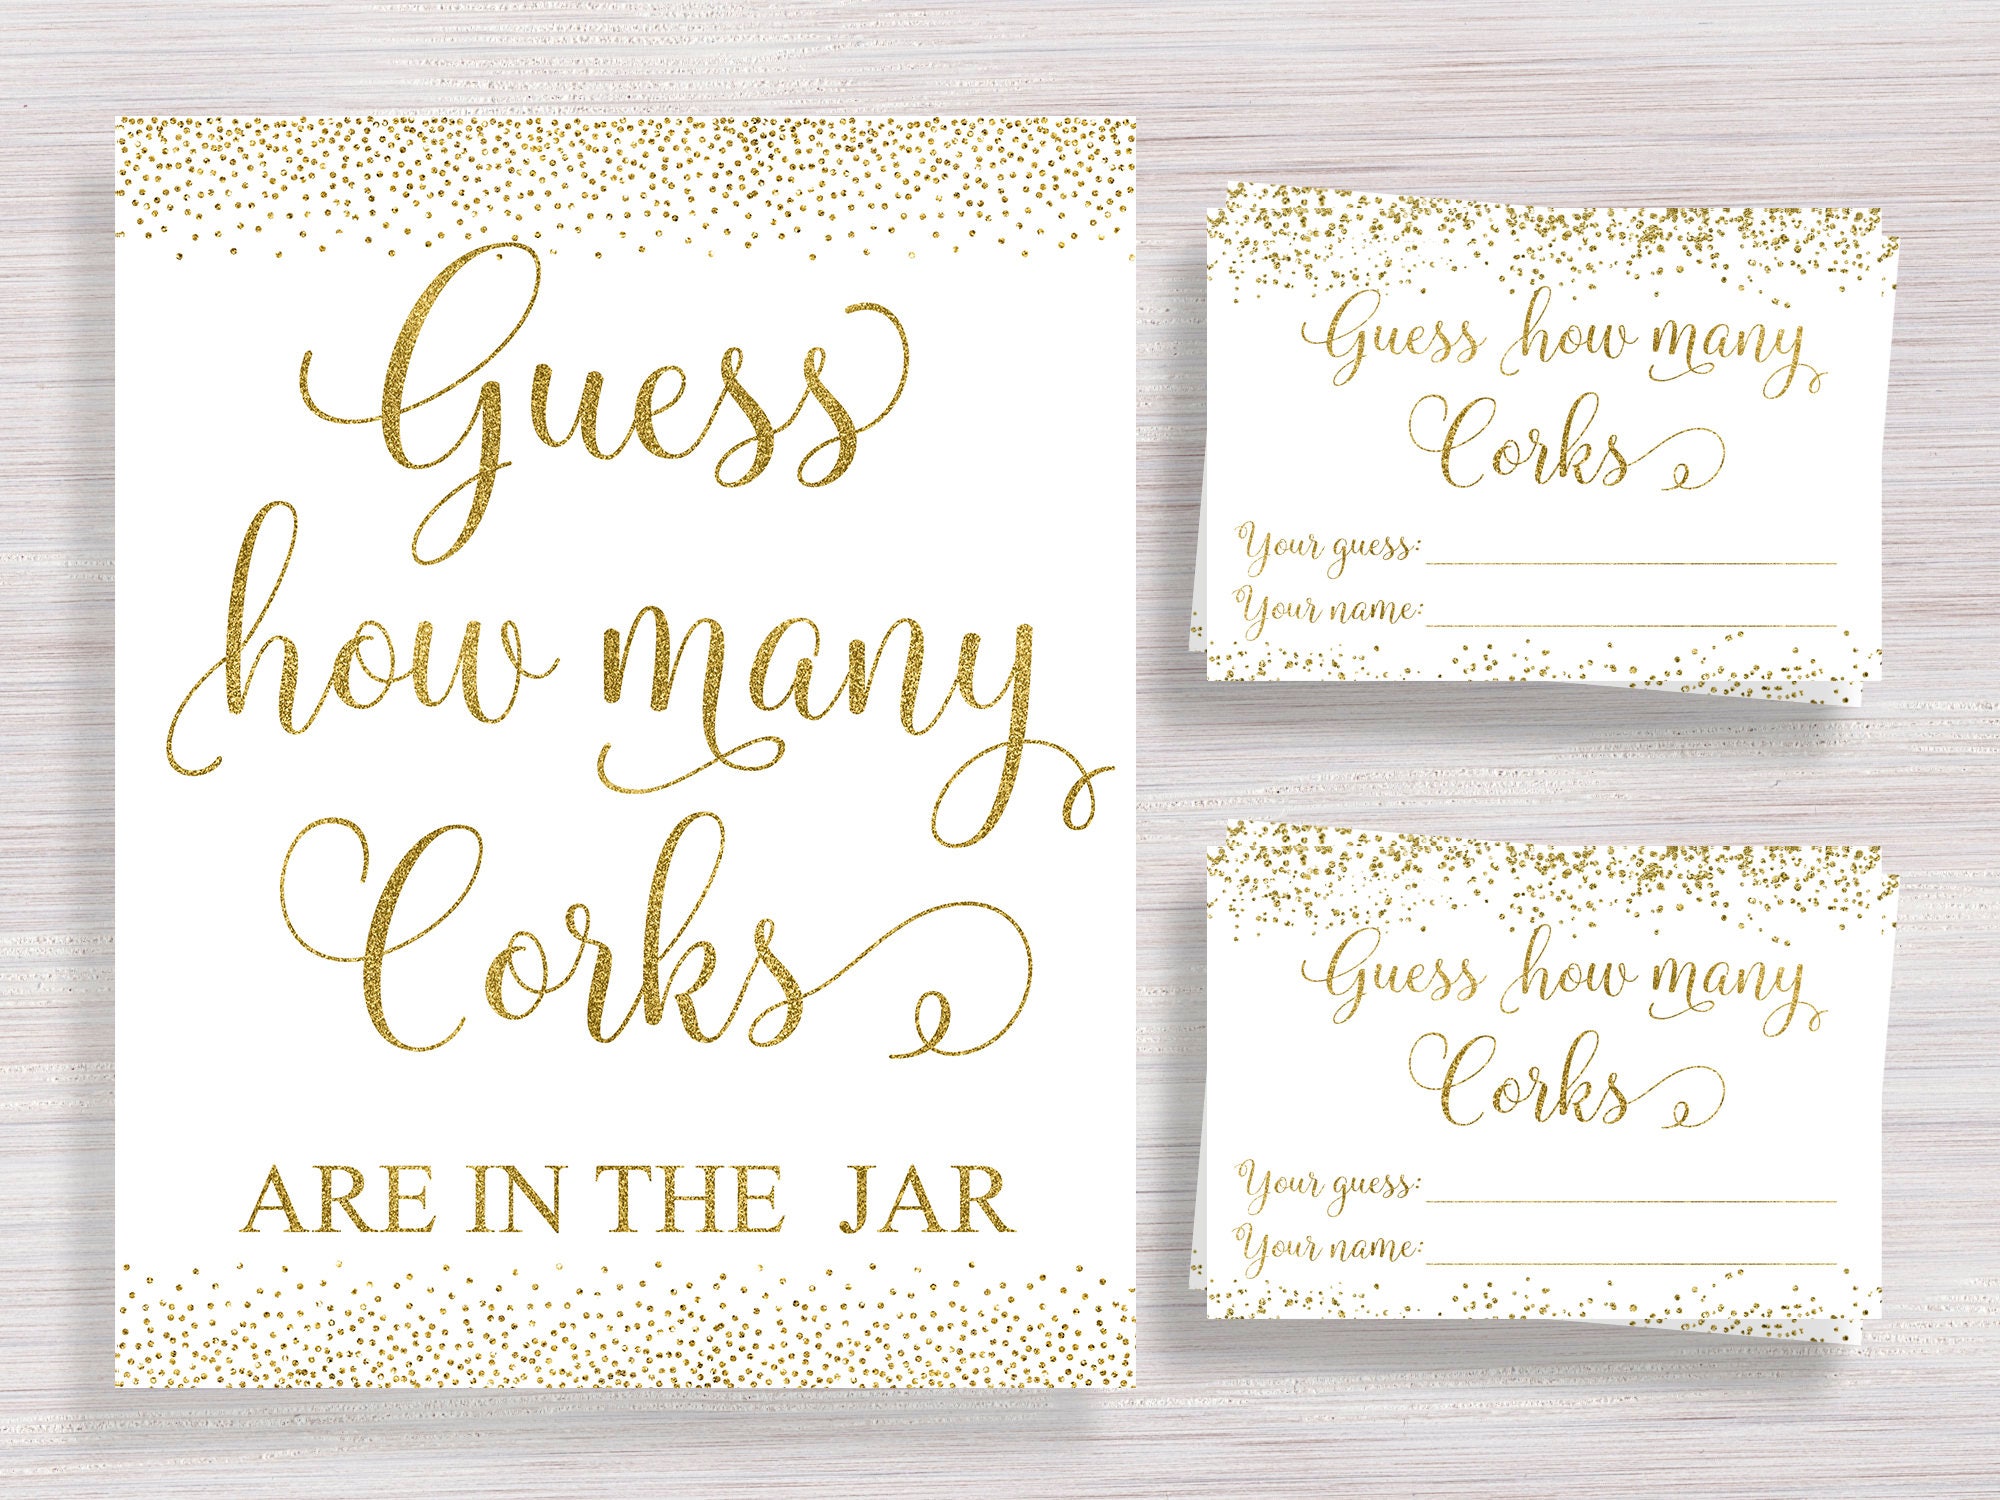 Guess How Many Corks Bridal Shower Games Gold confetti